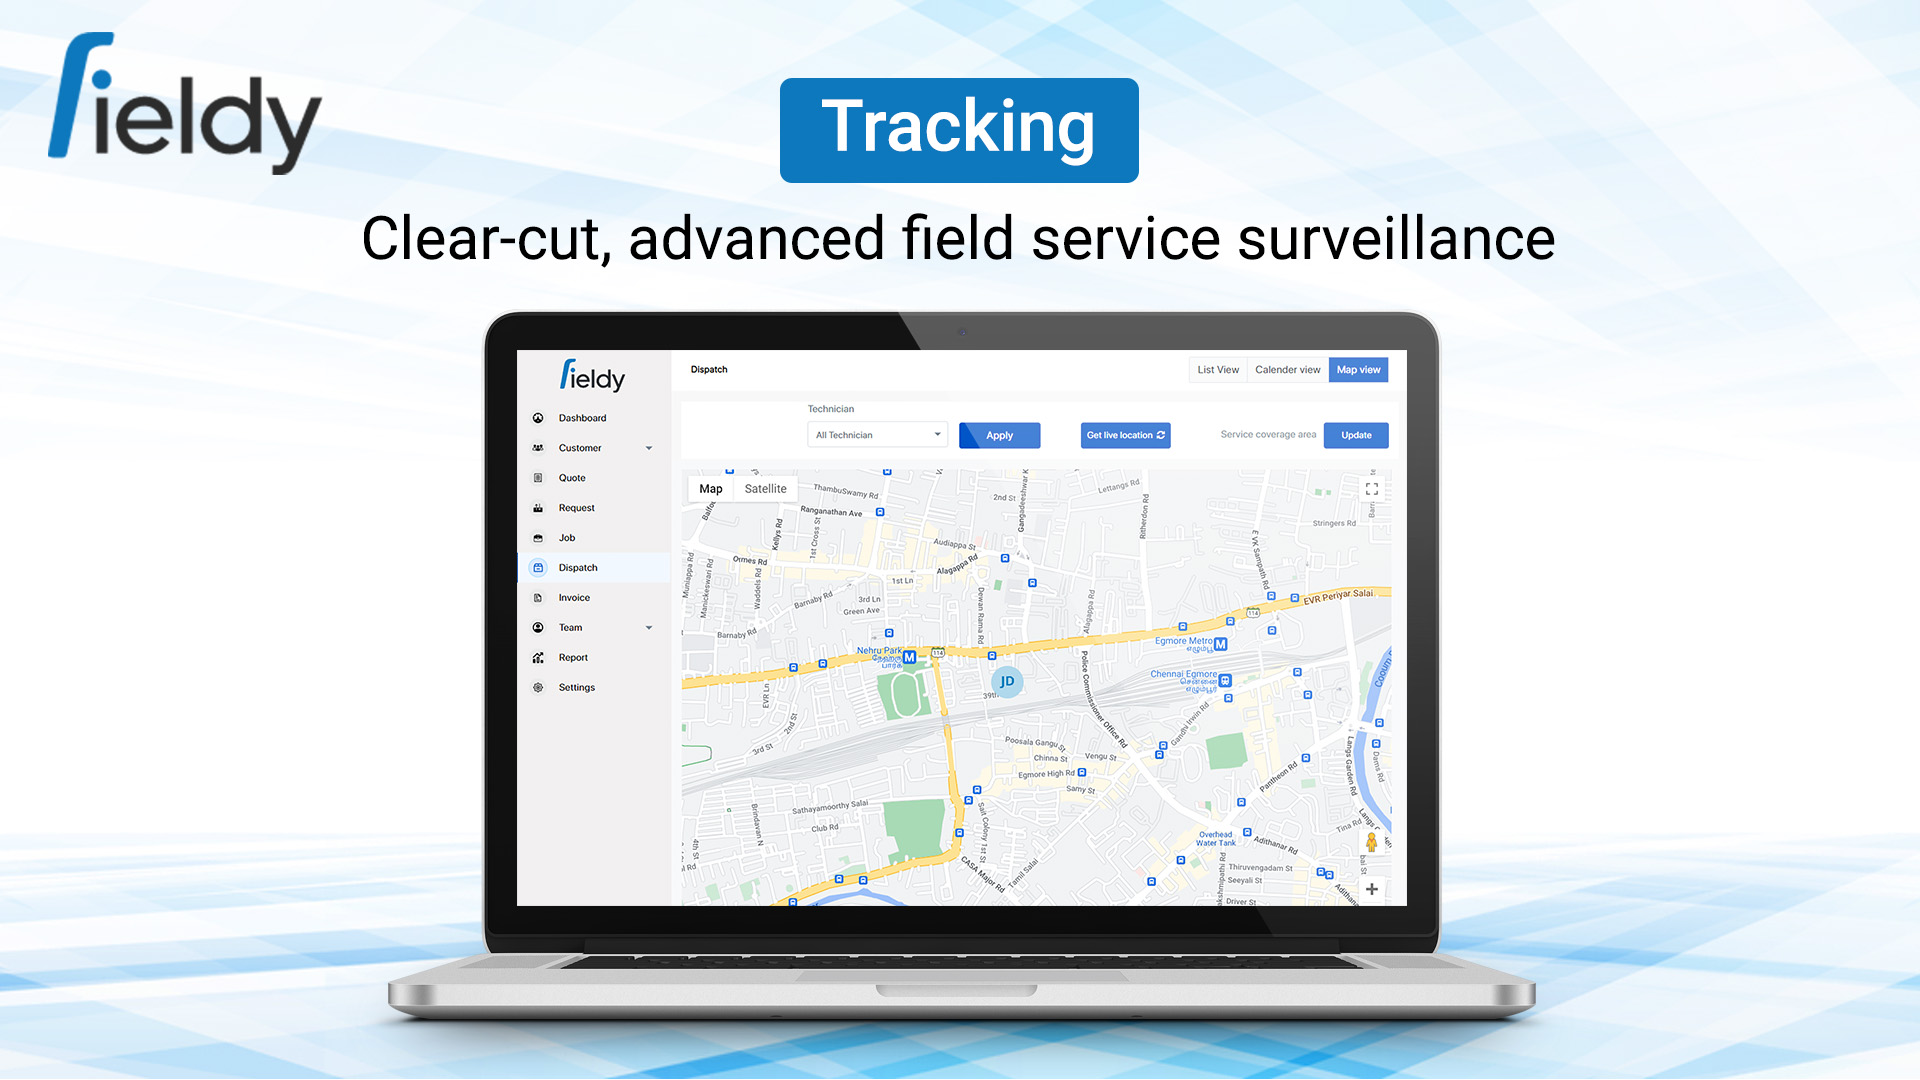 Fieldy: Superior field service tracking. Real-time location updates on an interactive map for efficient team management and deployment.